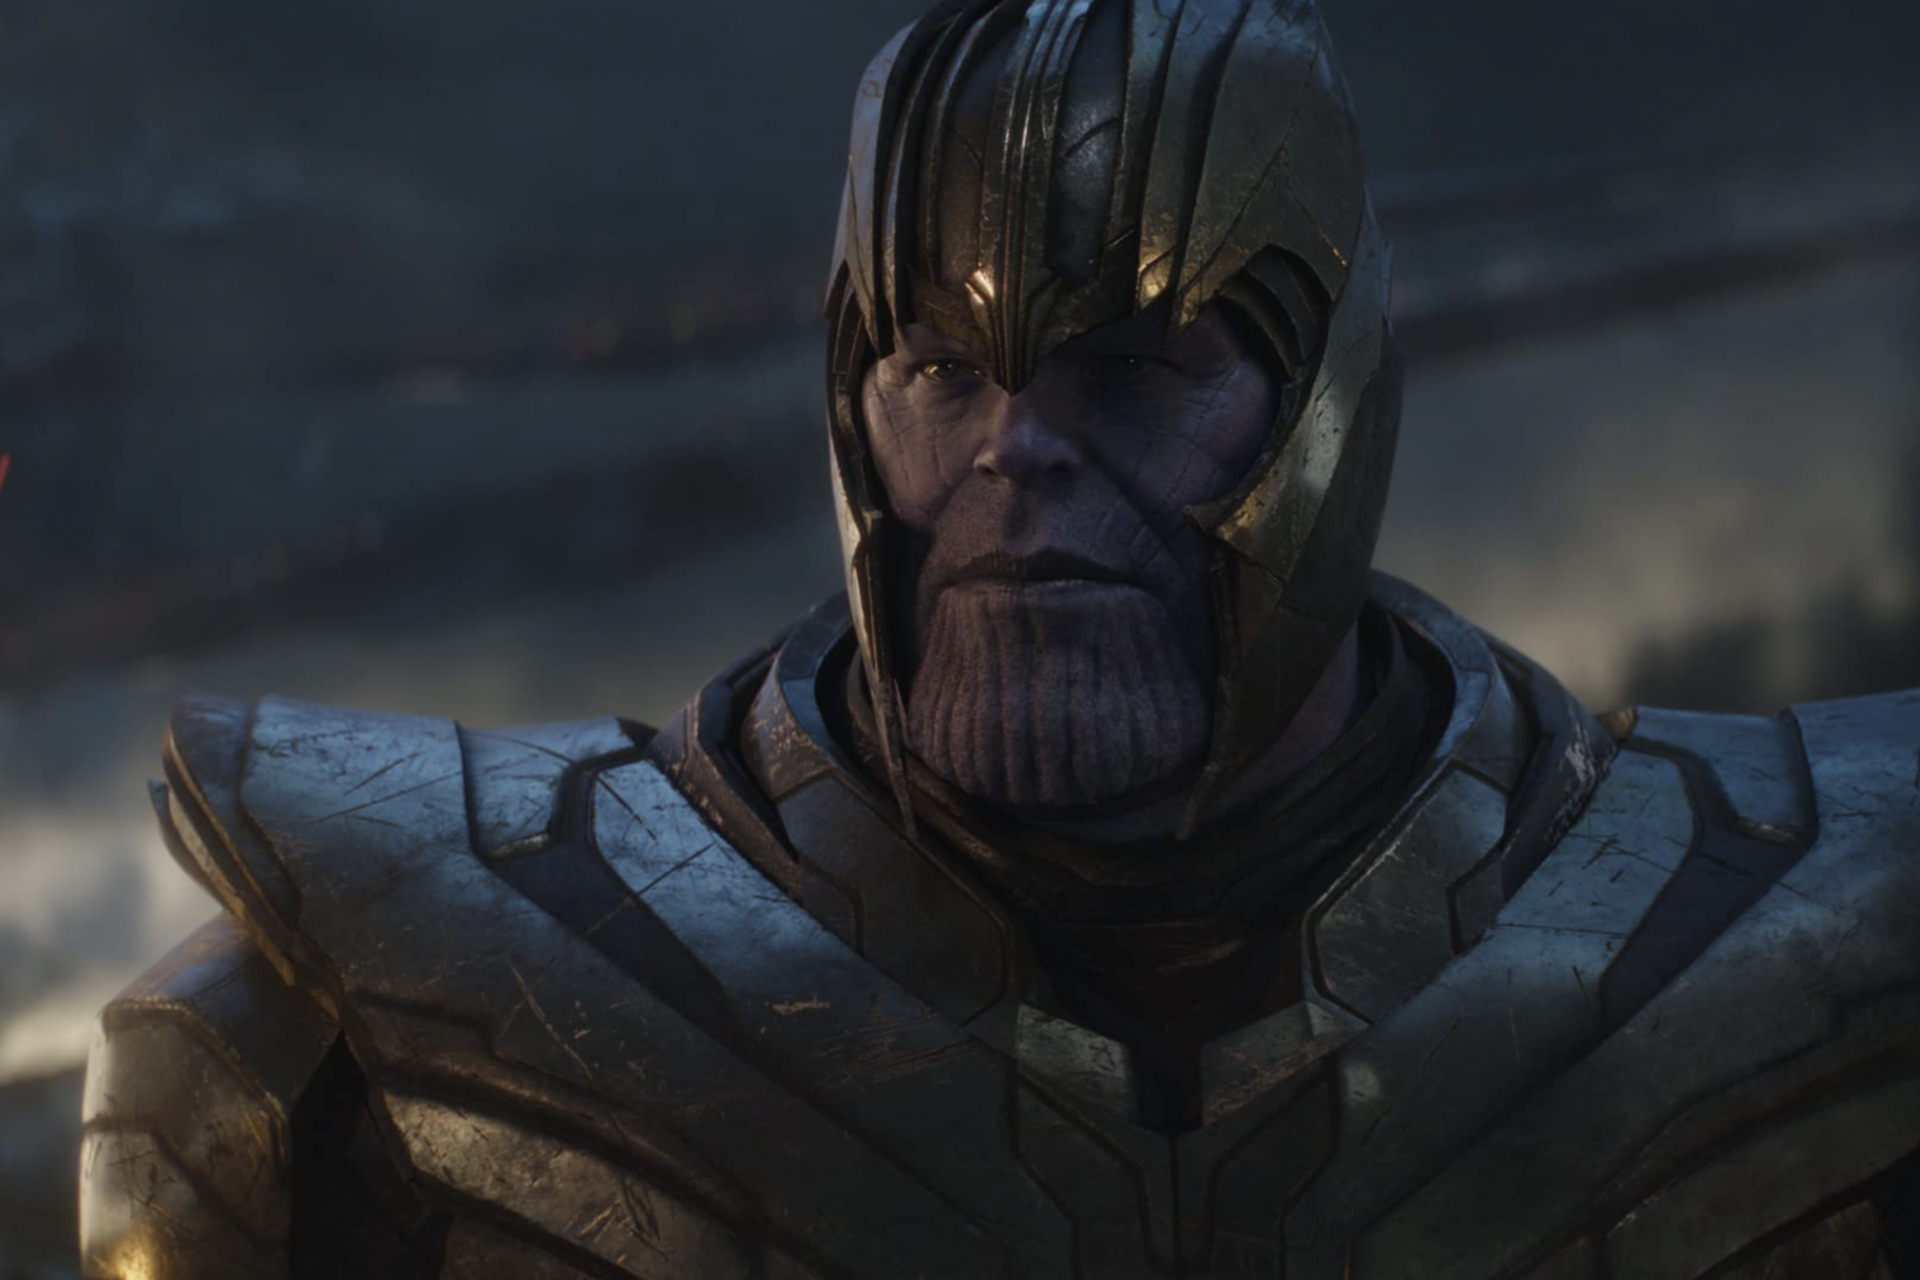 <p>Avengers: Endgame - The most epic film in the Marvel Cinematic Universe showed the world how to find the one way in 14 million to save the world, and it involved a lot of time travel.</p> <p>Photo: Marvel Studios</p>